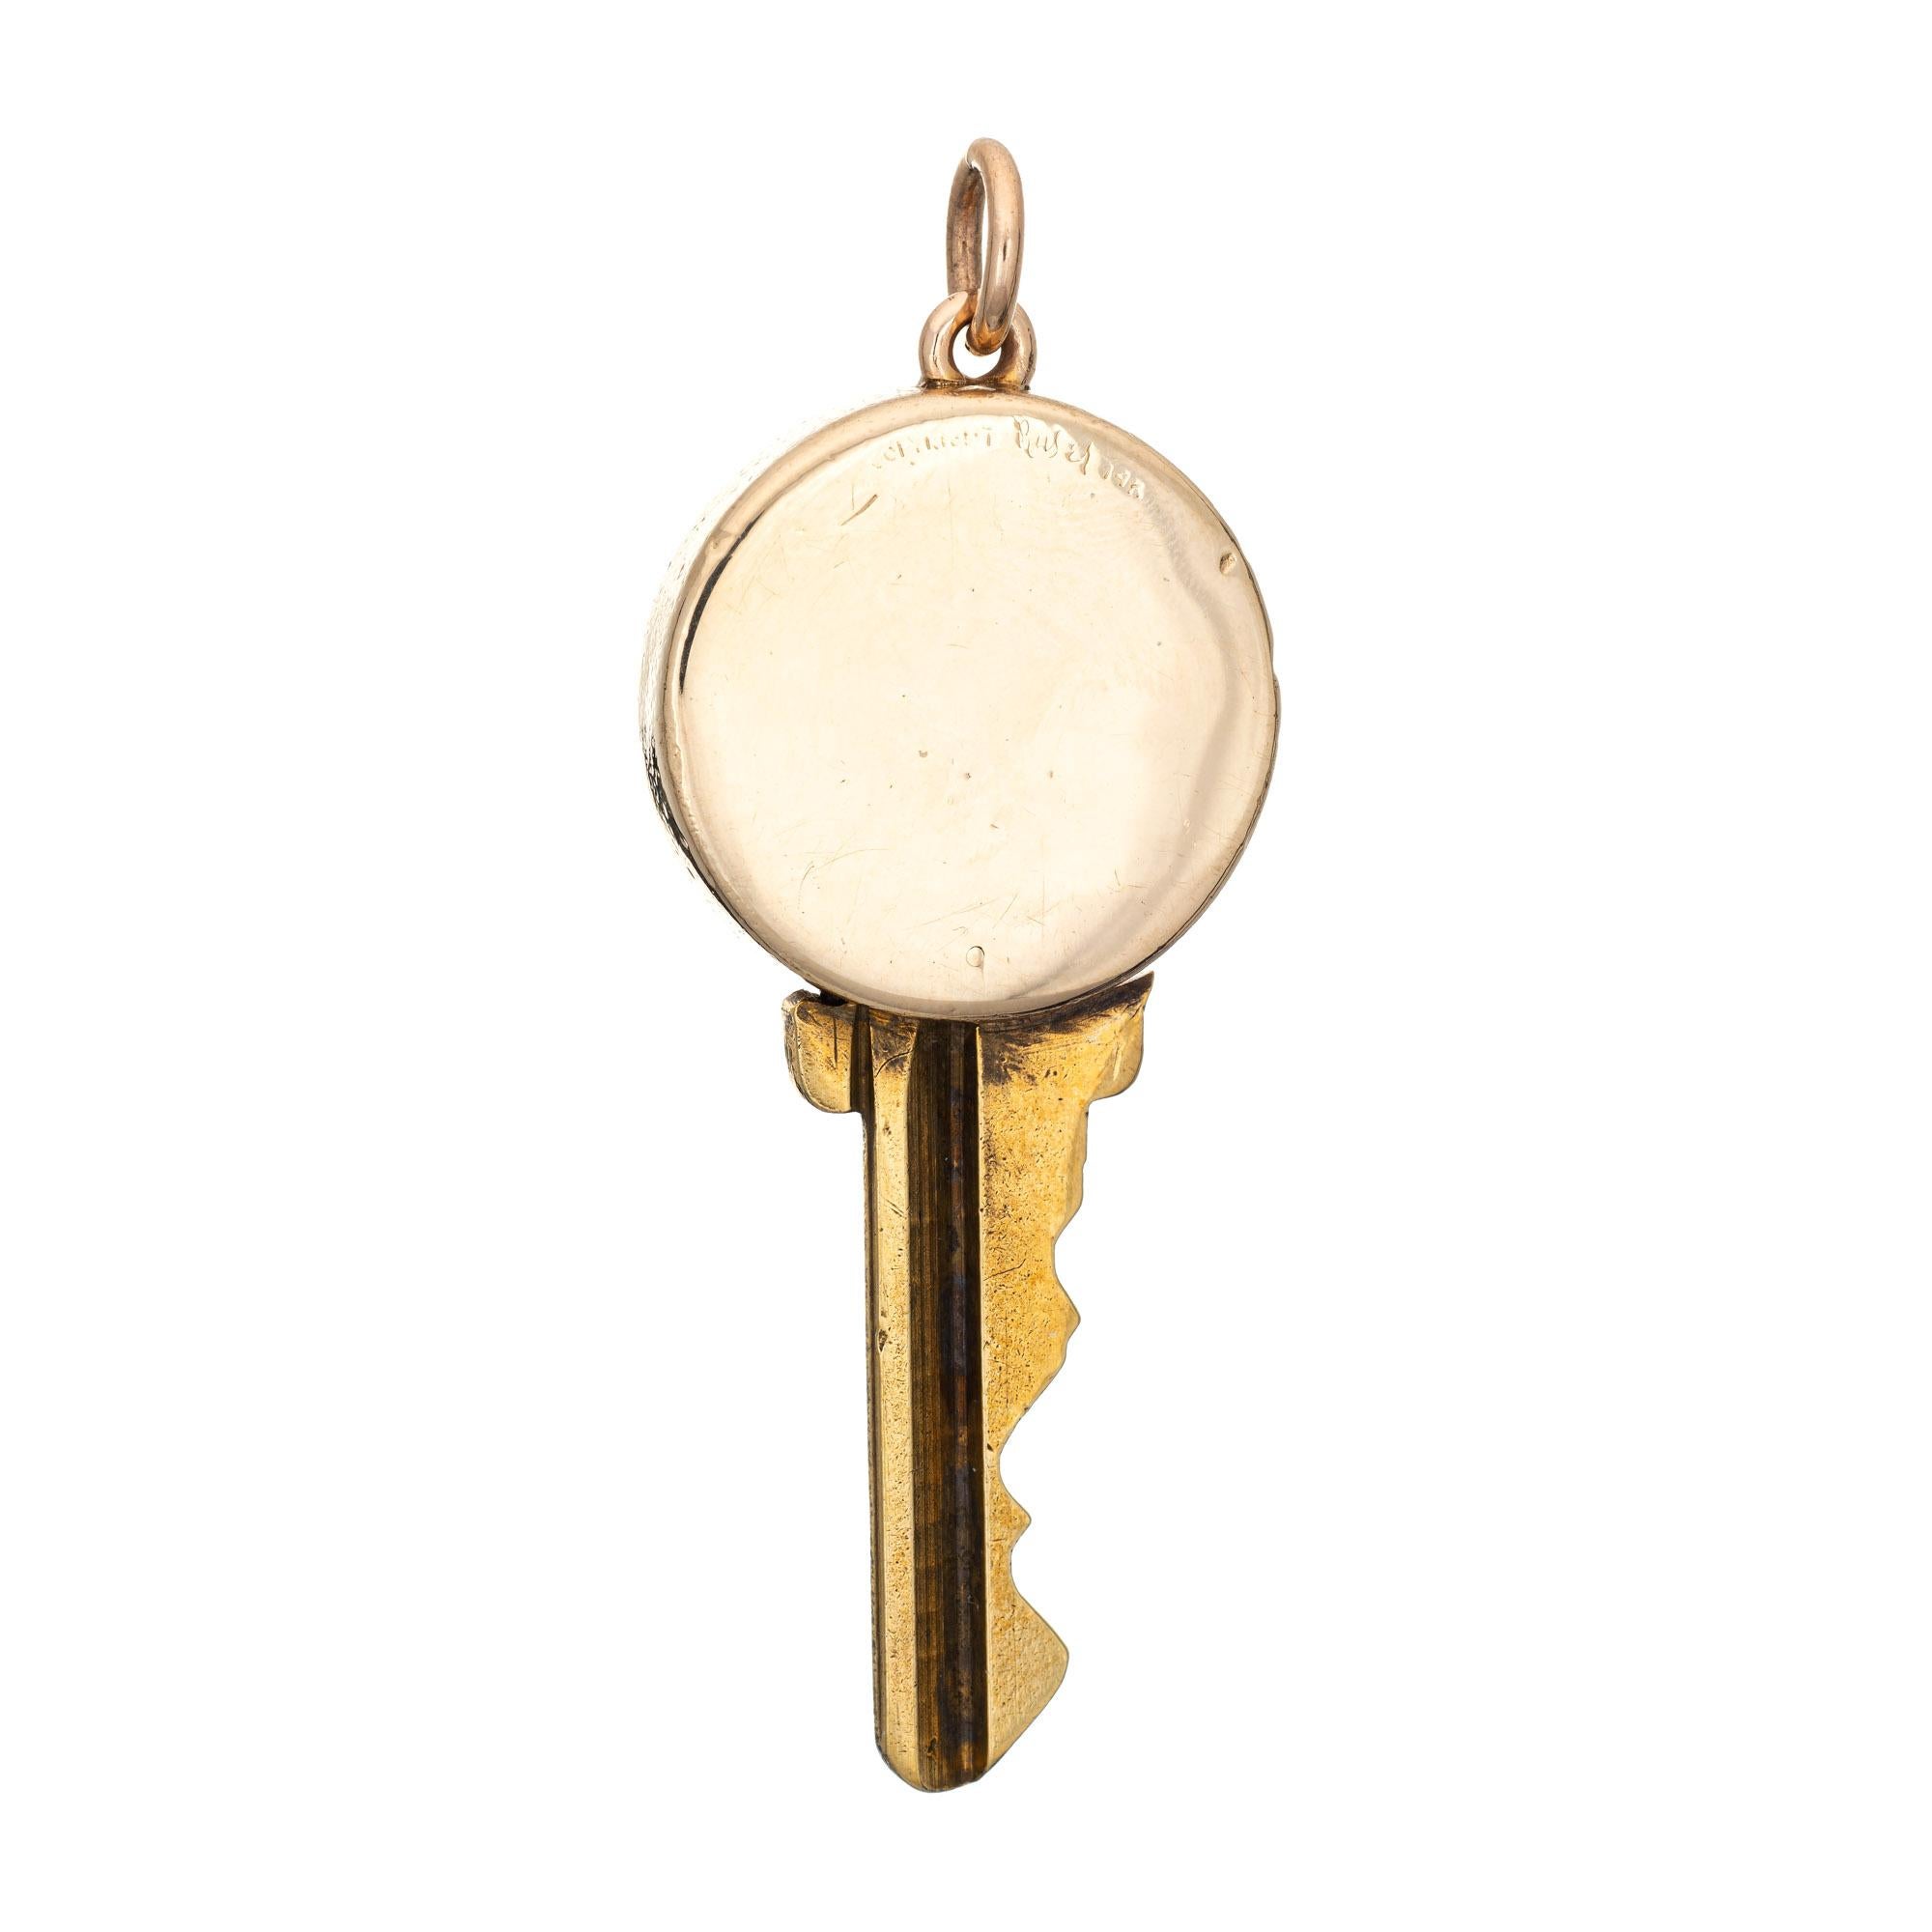 Finely detailed vintage Ruser key pendant charm (circa 1950s to 1960s), crafted in 14 karat yellow gold. 

Saint Genesius of Rome is a legendary Christian saint, once a comedian and actor who had performed in plays that mocked Christianity. The